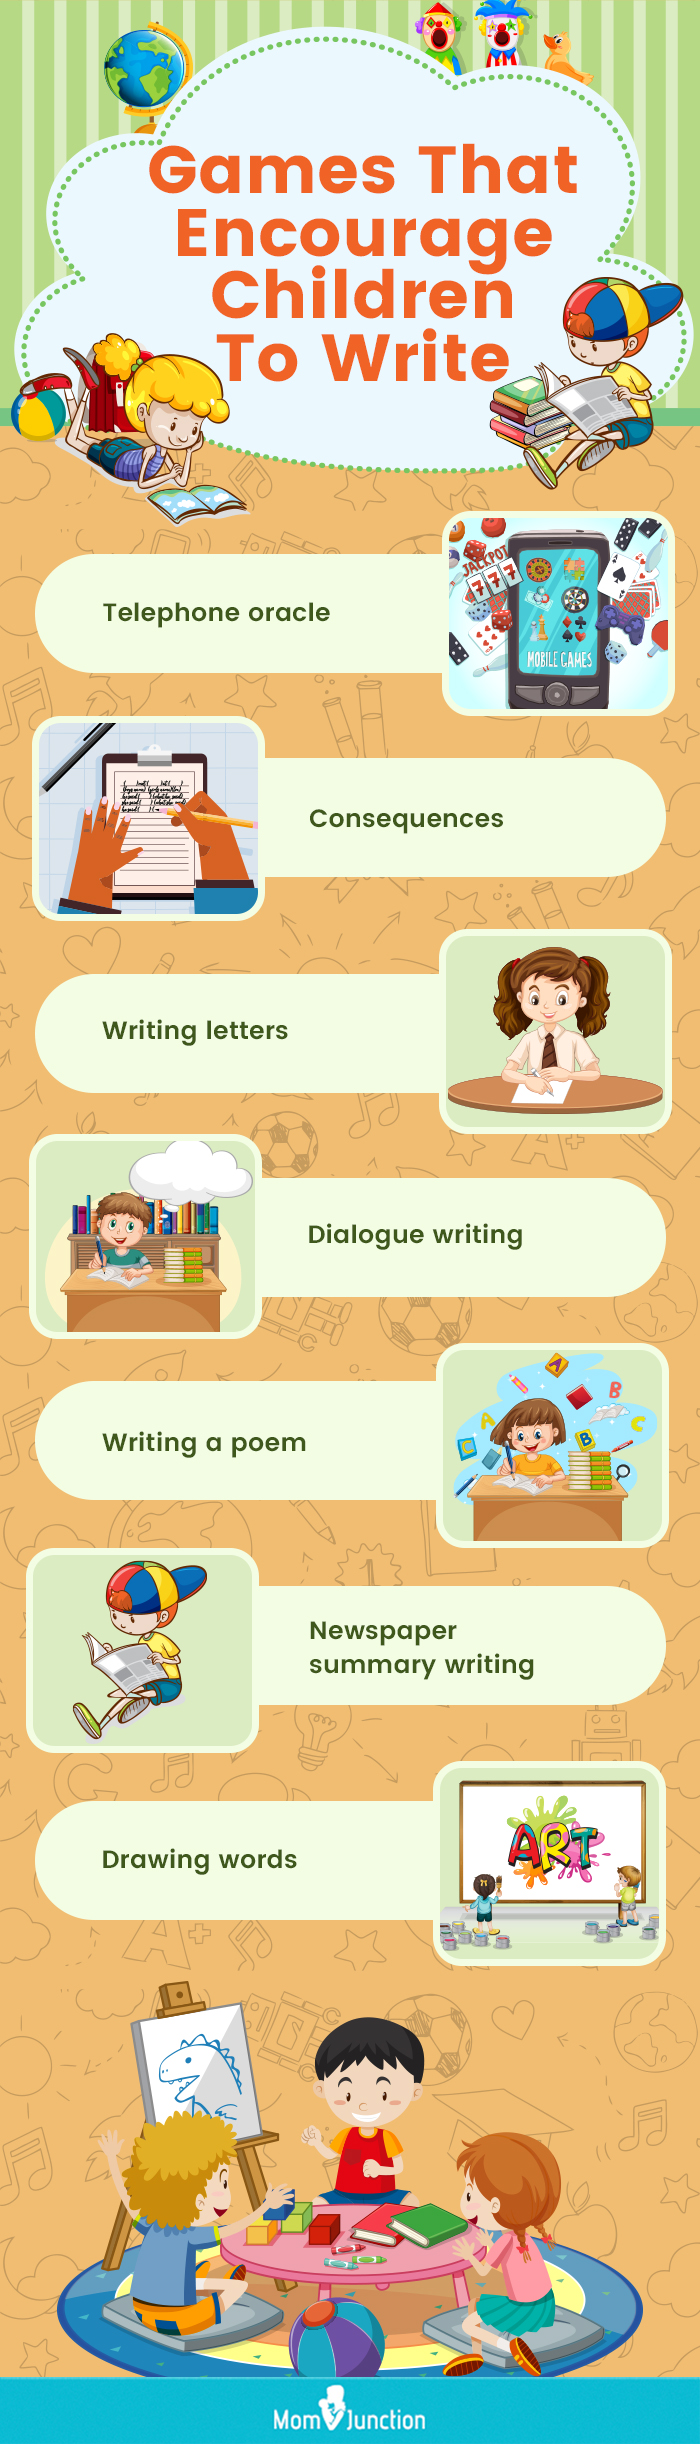 games that encourage children to write [infographic]